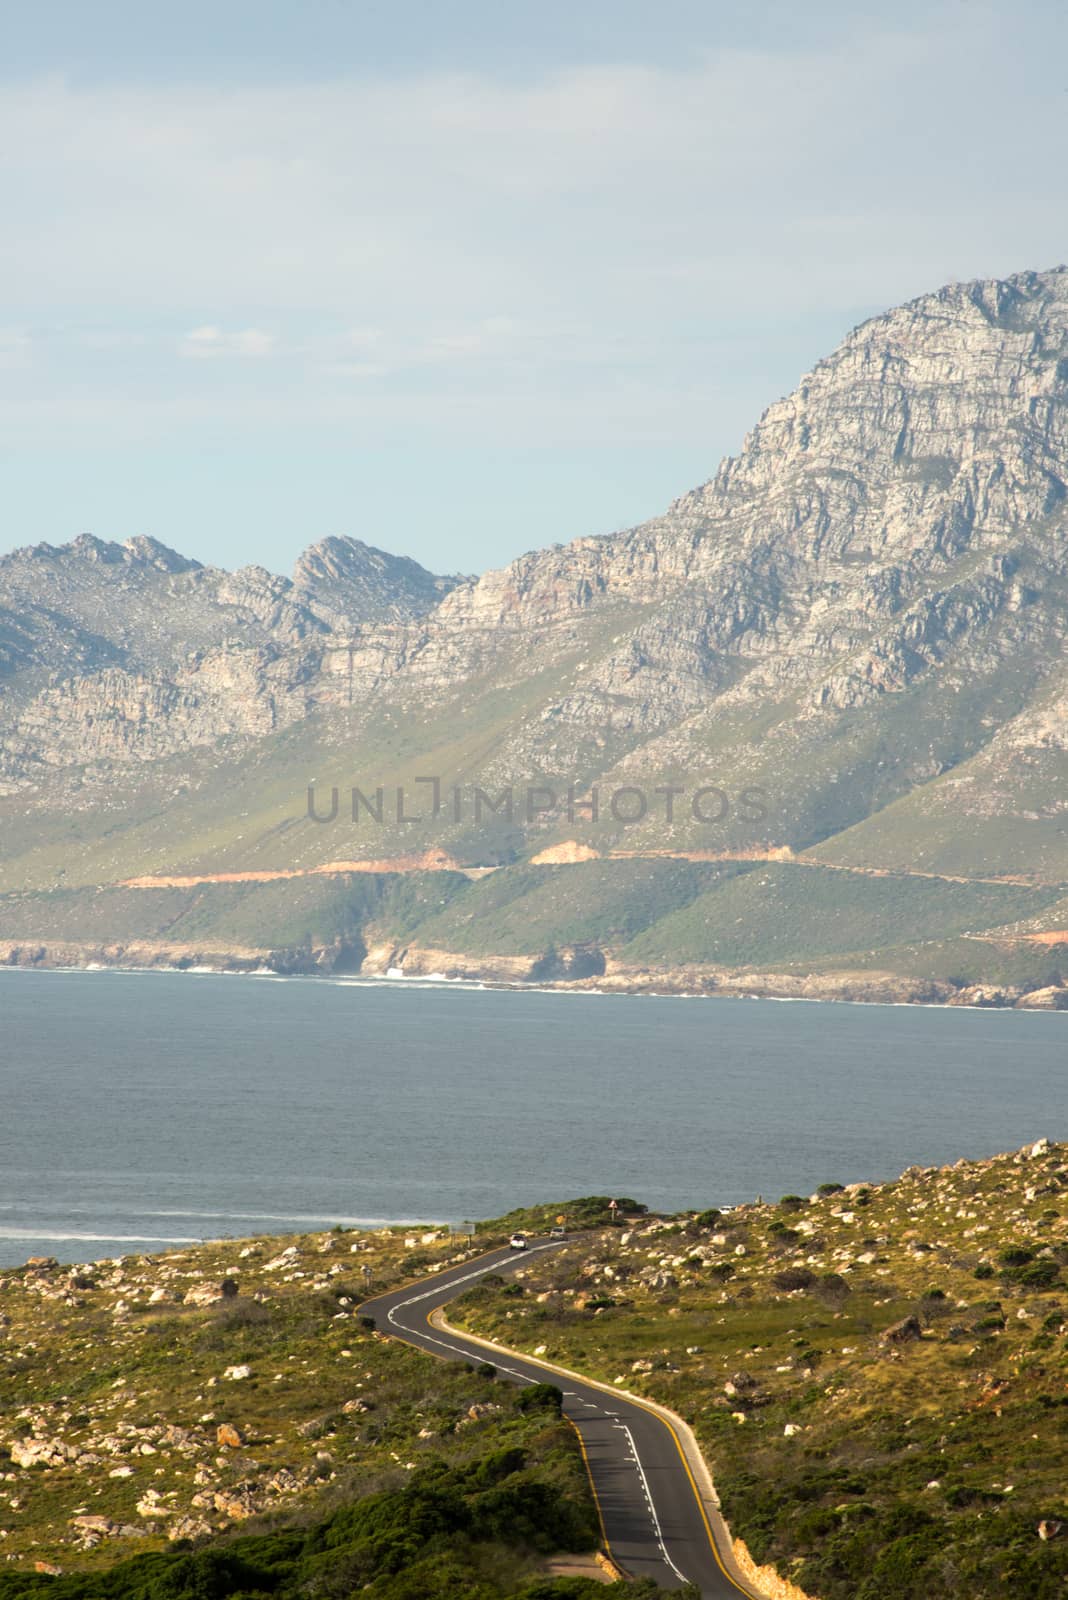 The scenic road from Gordon's Bay to Rooi Els as the sun starts setting over False Bay.